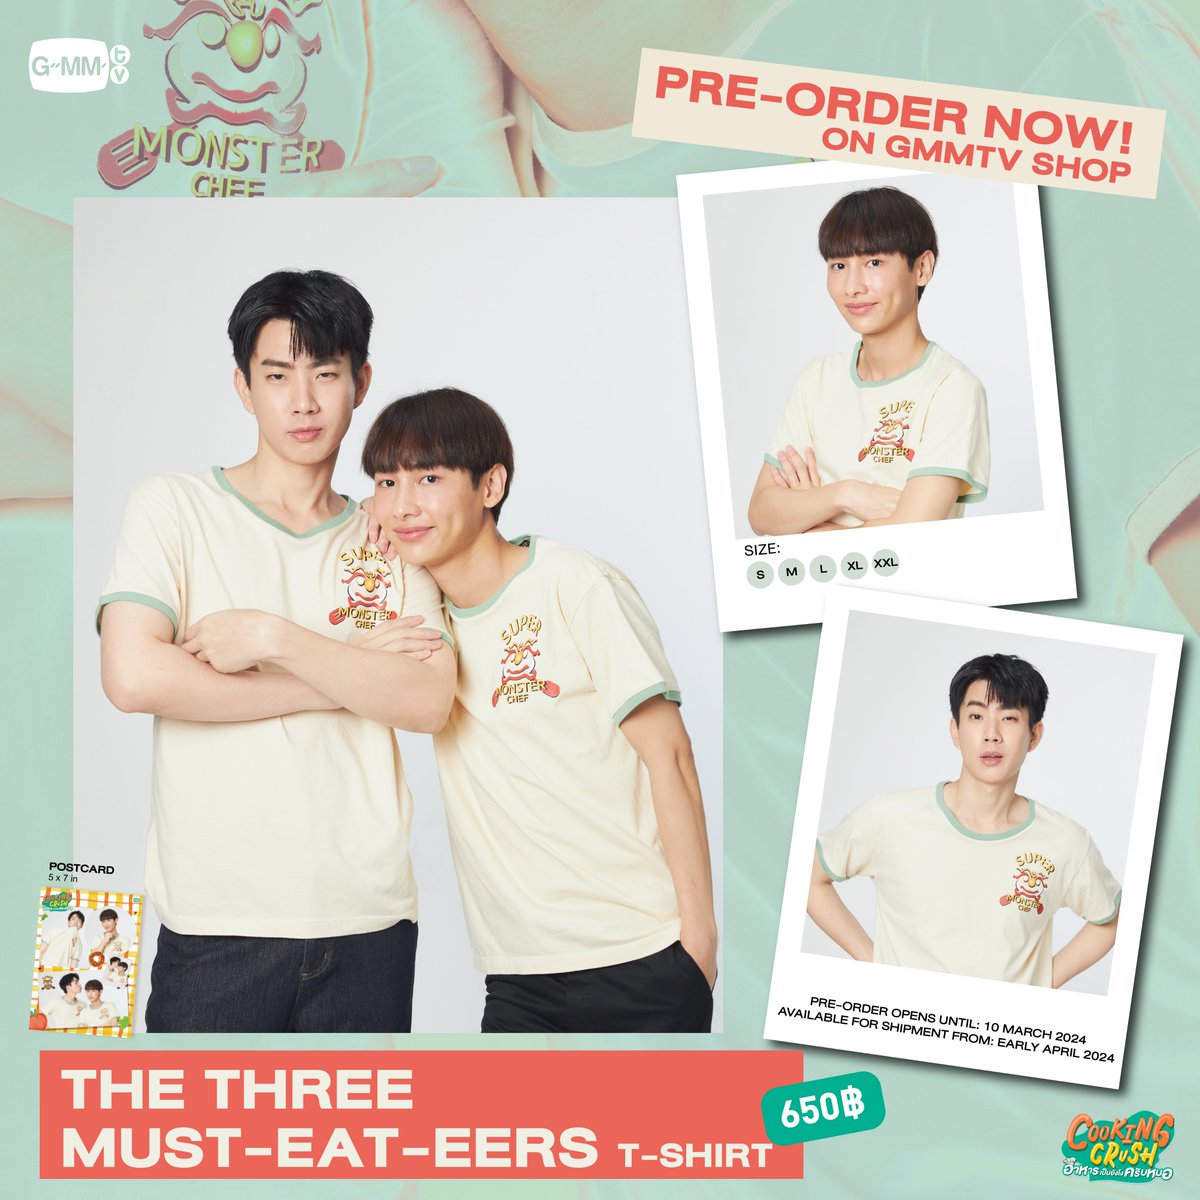 THE THREE MUST-EAT-EERS T-SHIRT | COOKING CRUSH is so cool you can’t help but want to pre-order. gmm-tv.com/shop/the-three… Pre-order opens now until March 10, 2024. All purchase orders will be shipped sequentially starting from early April 2024. #CookingCrushSeries #GMMTV